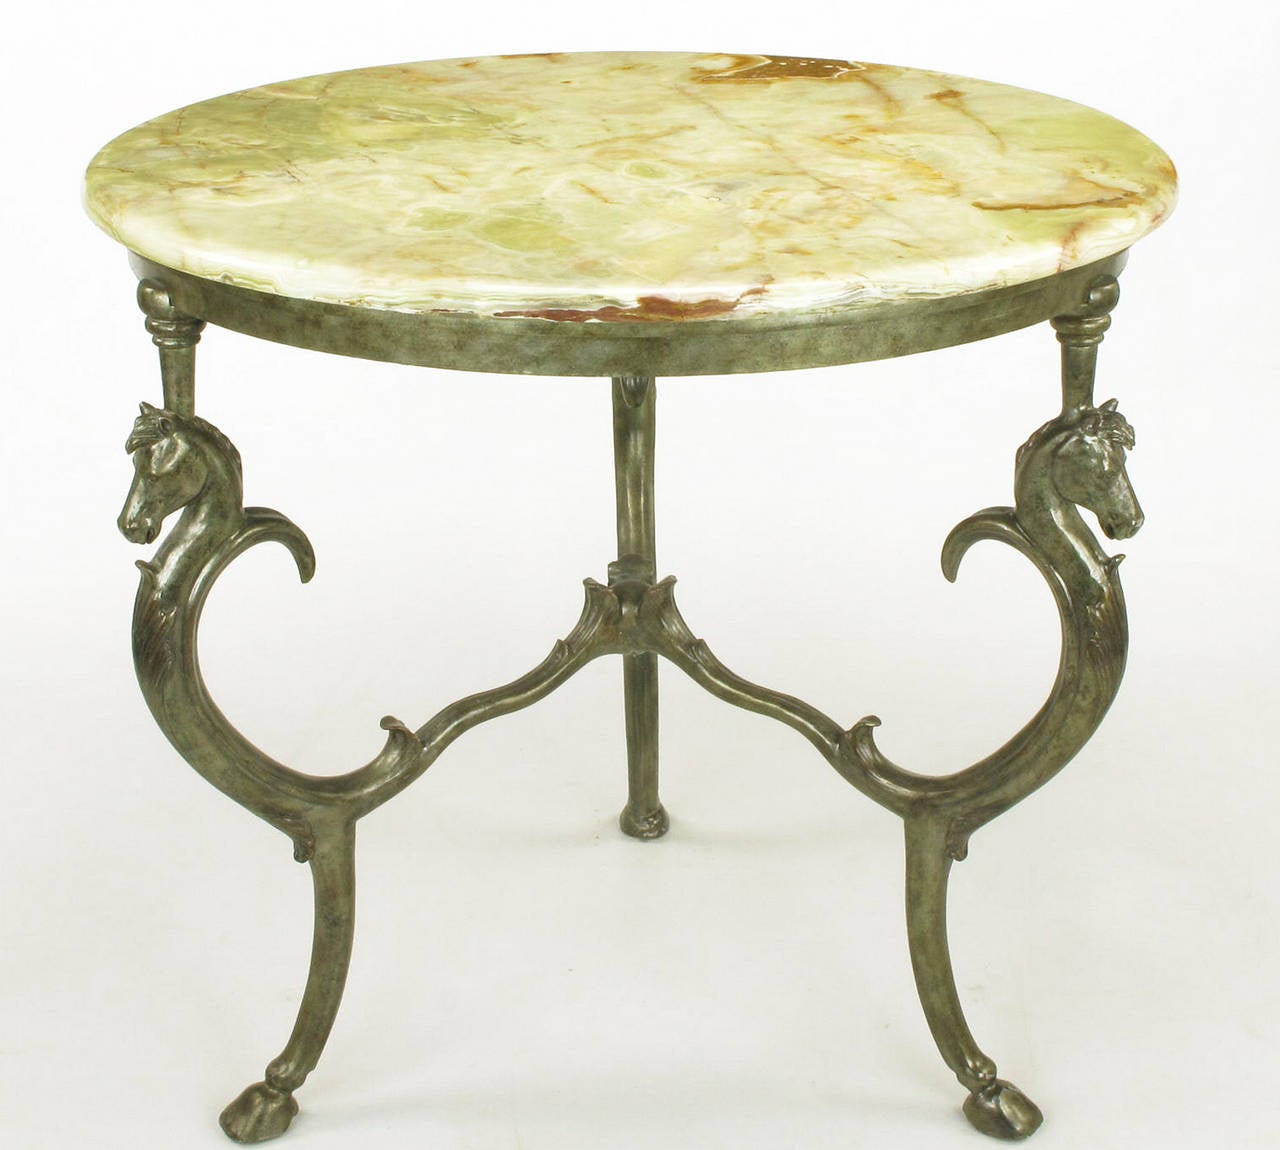 French style center table or bistro table with a trio of horse heads with hoofed legs that join at a center ball. Lacquered iron resembling aged bronze and beautifully veined onyx top.